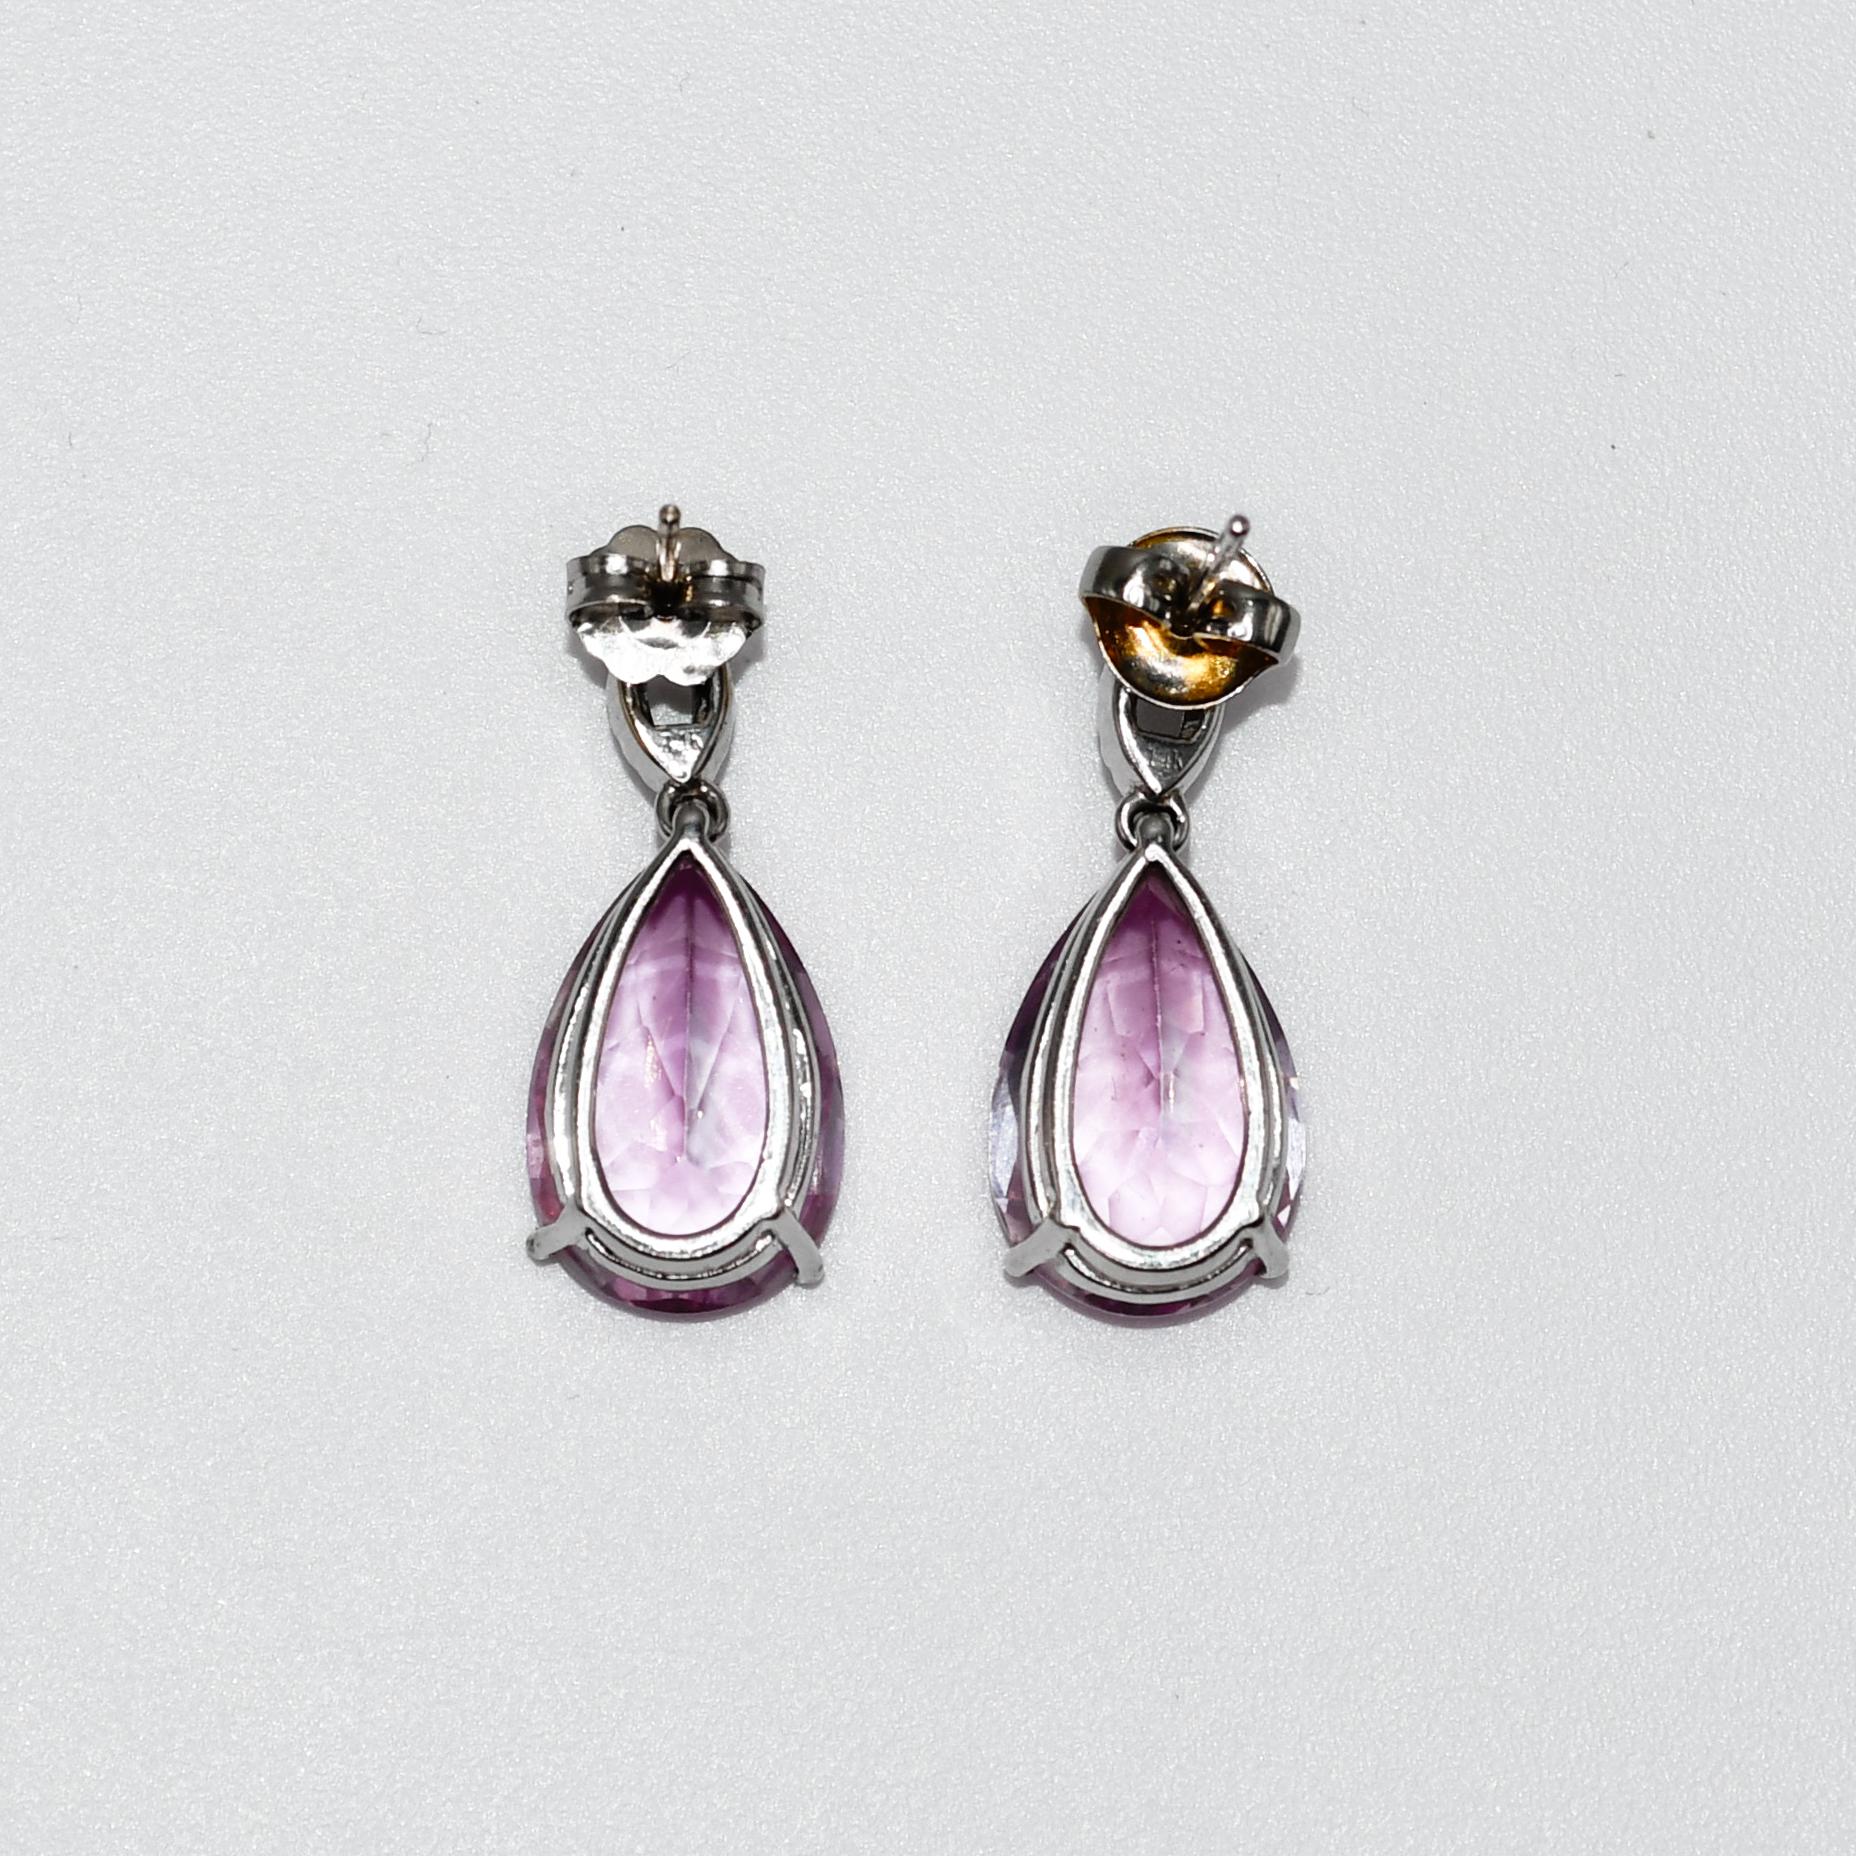 14K White Gold Pink Lab Topaz & Diamond Earrings, 15.00tcw, 6.8g In Excellent Condition For Sale In Laguna Beach, CA